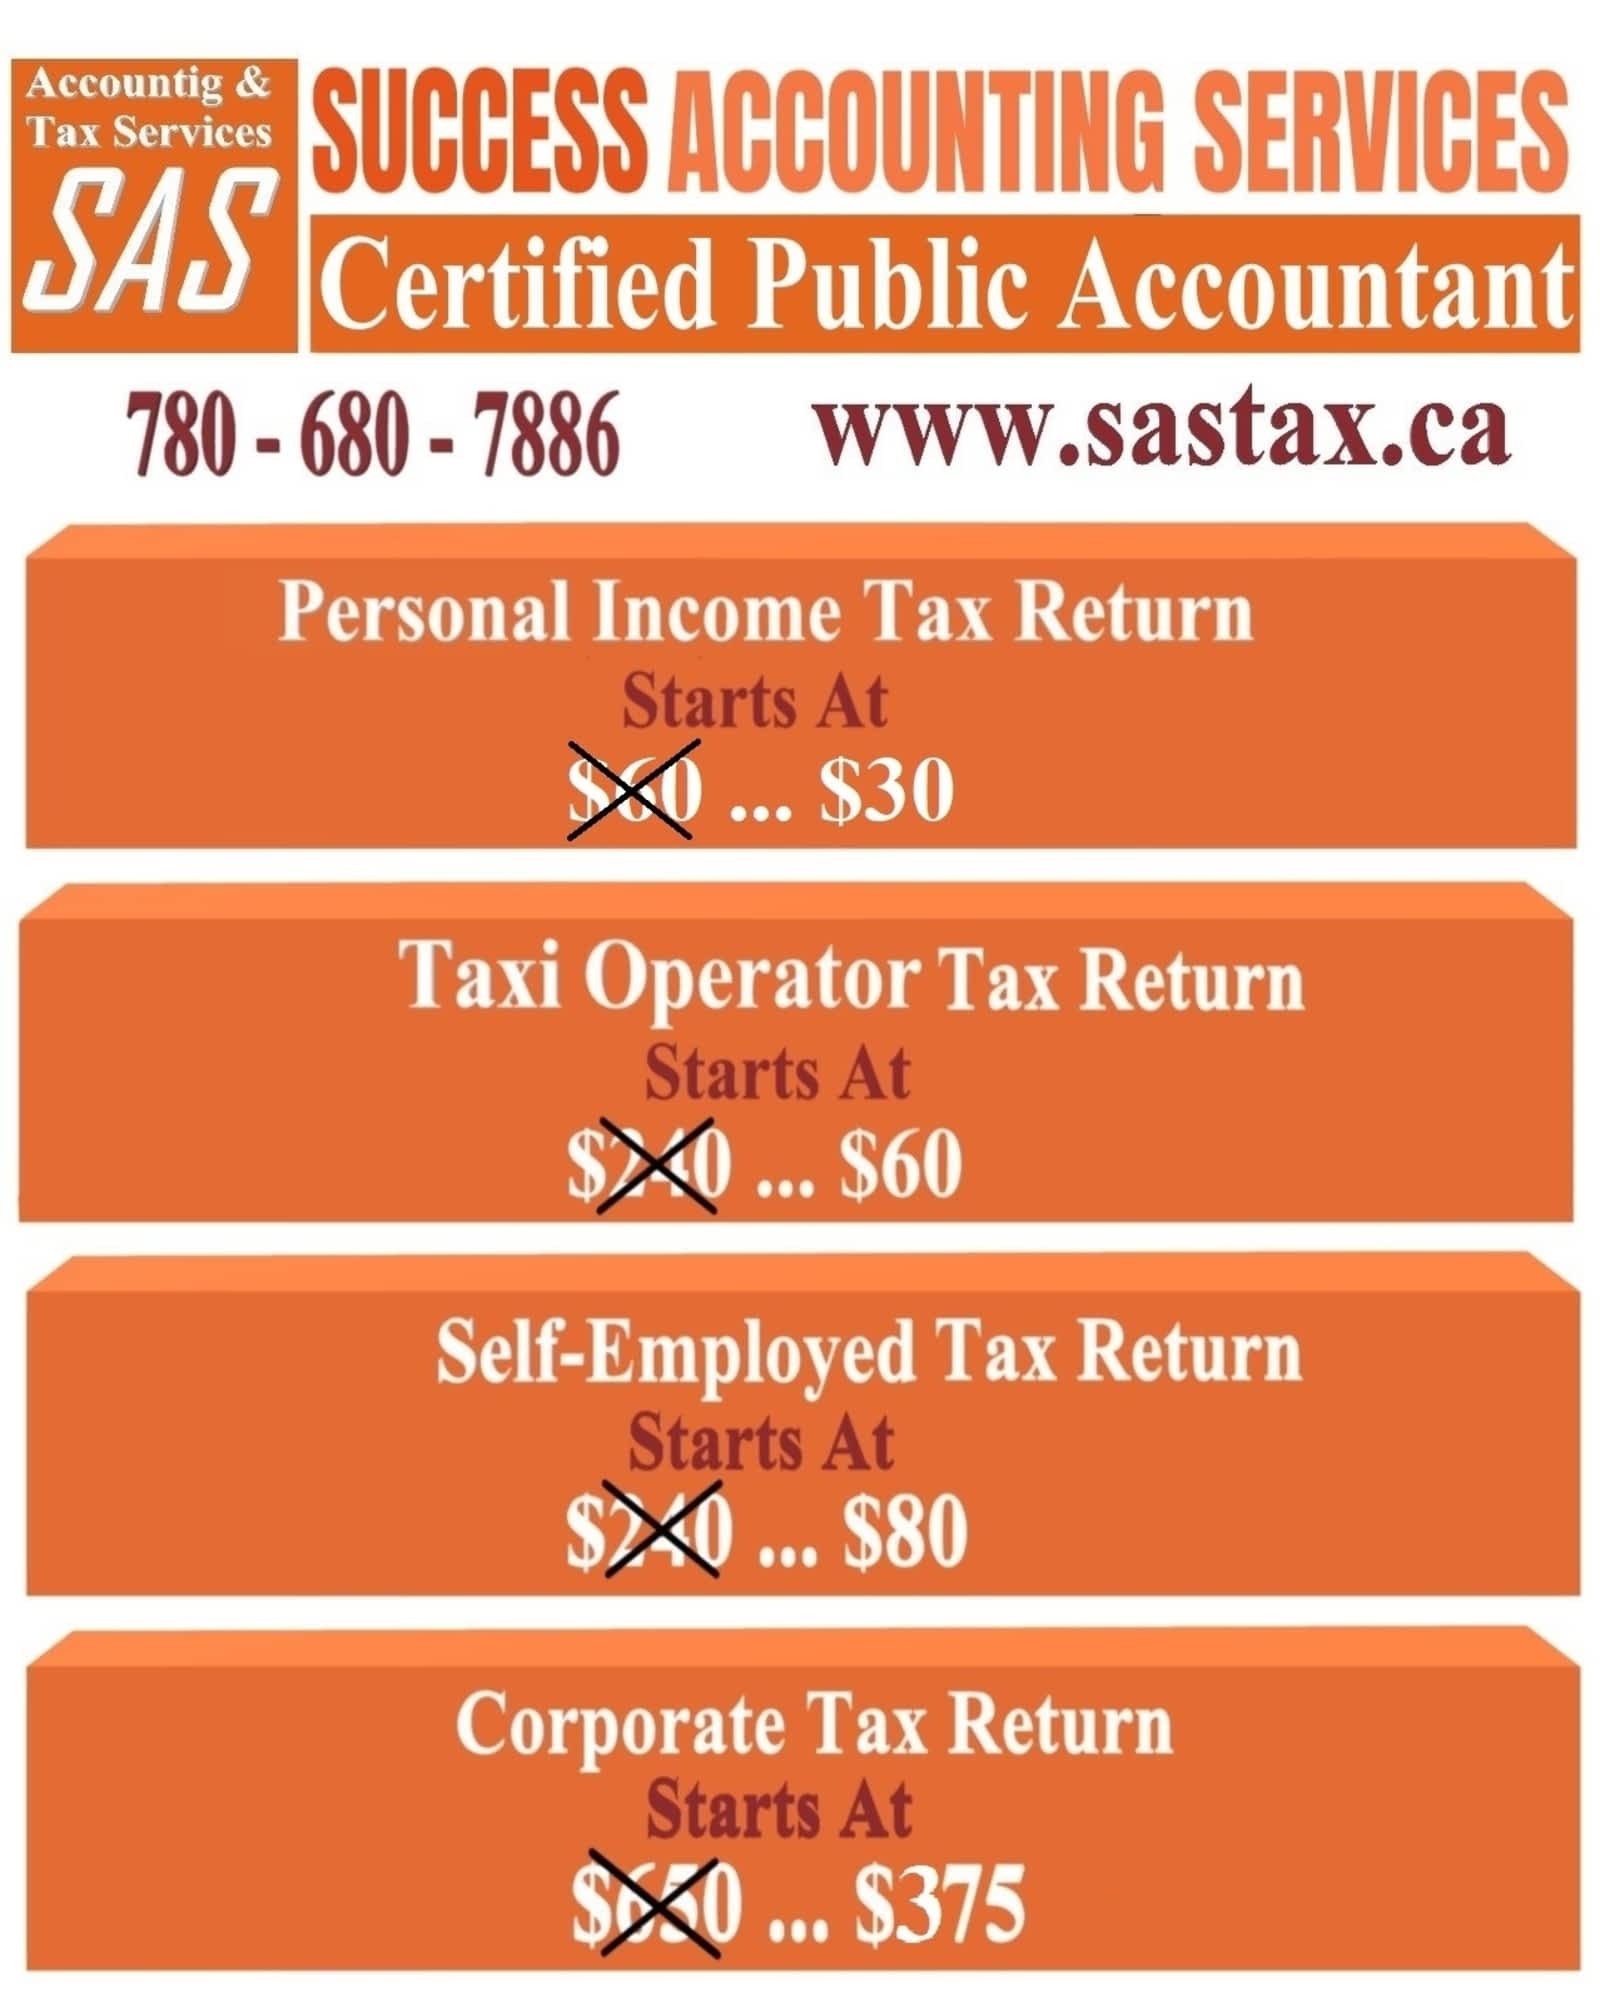 Success Accounting Services Certified Public Accountant Opening Hours 17507 91 Street Northwest Edmonton Ab